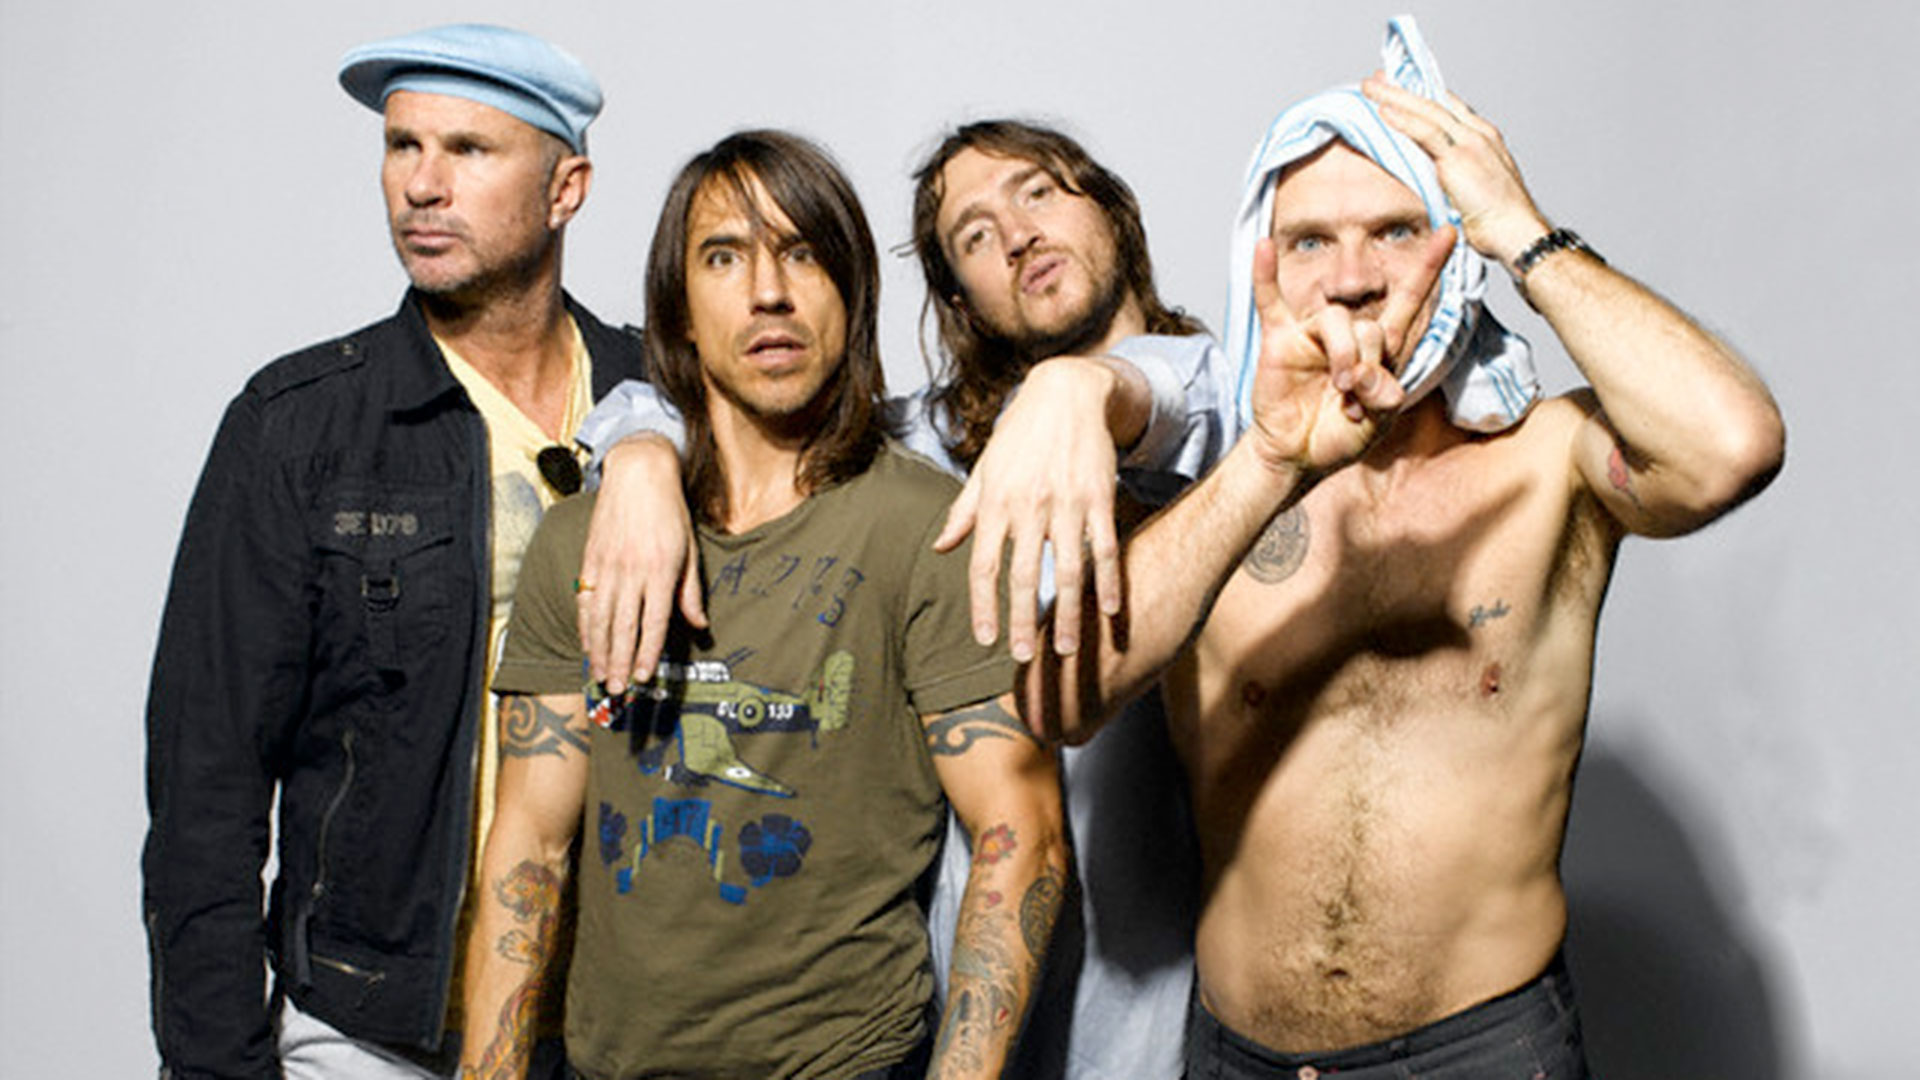 Los 10 Mejores Videoclips de Red Hot Chili Peppers Según Rolling Stone